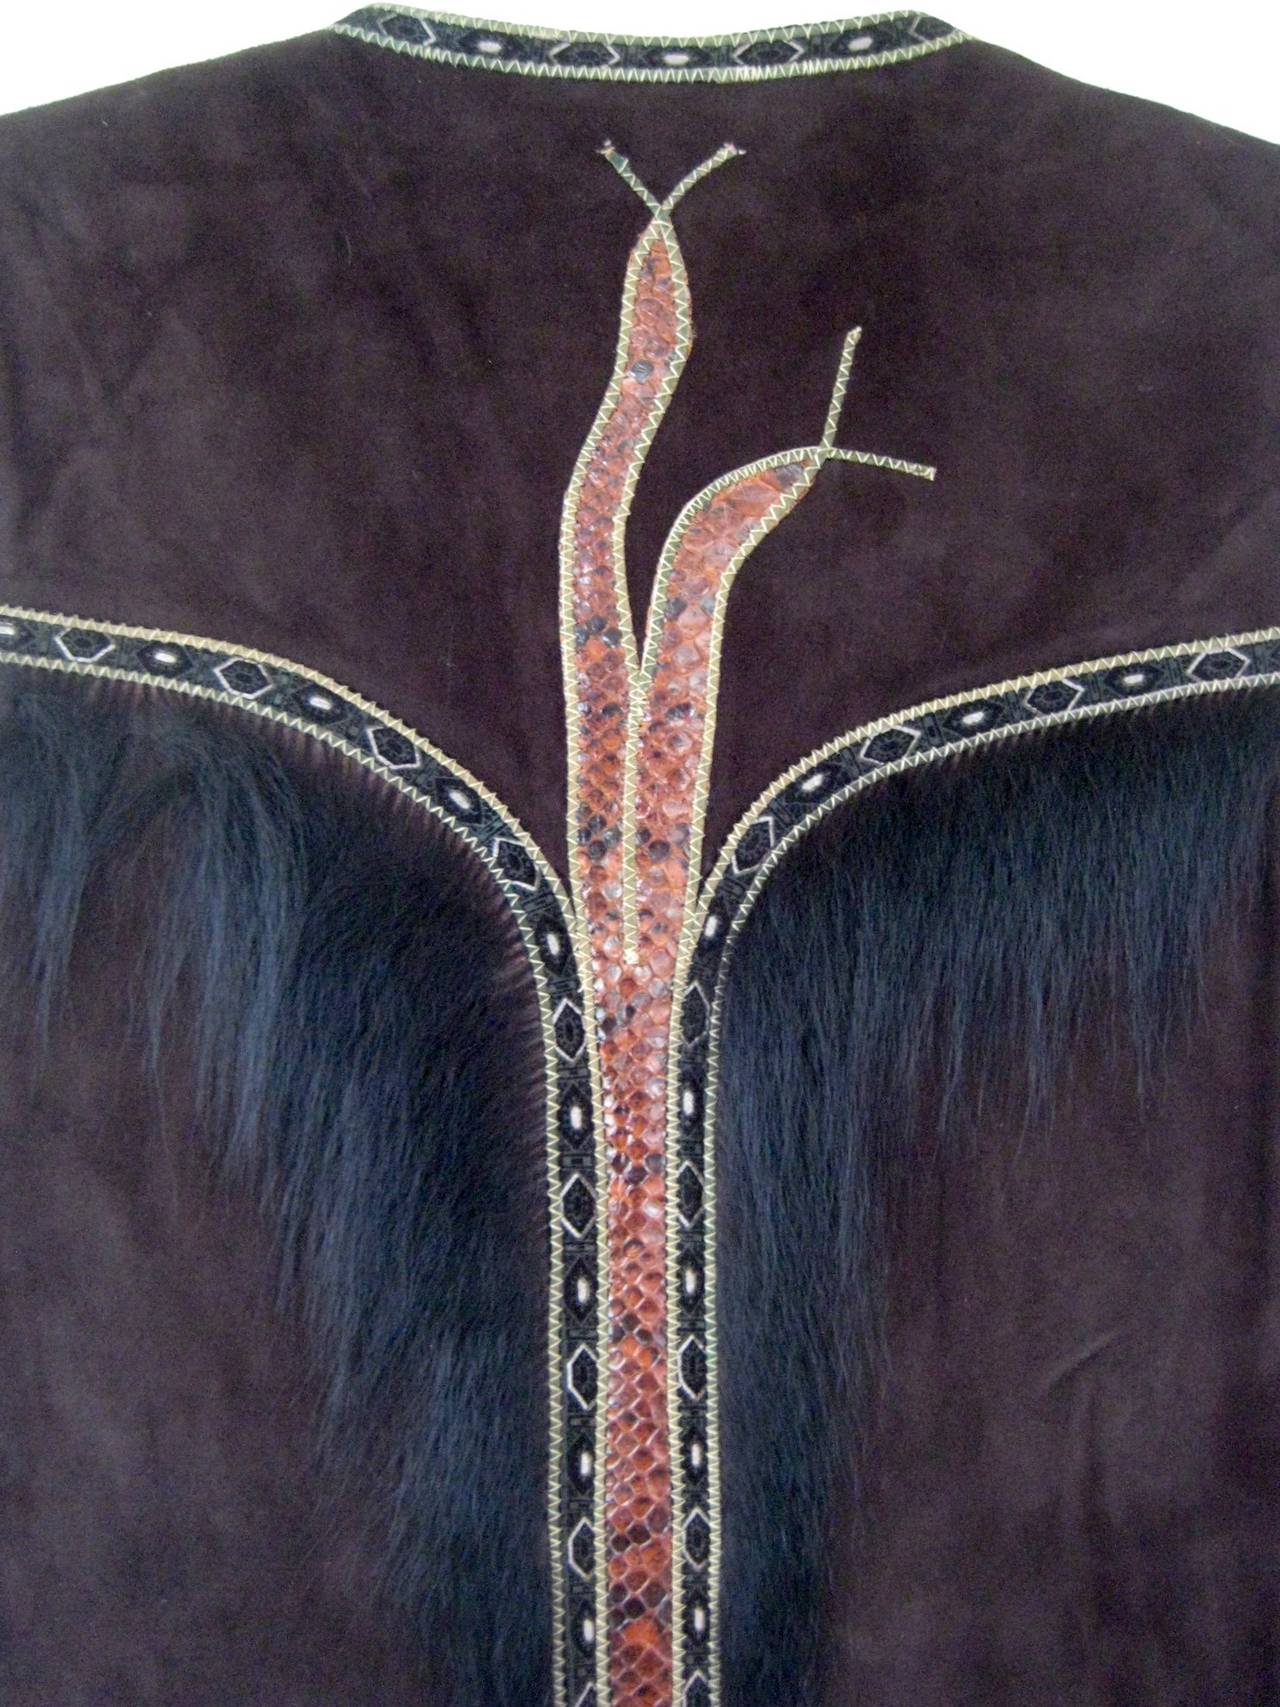 1970s Roberto Cavalli Hand Painted Suede Vest with Snakeskin Appliqué 1